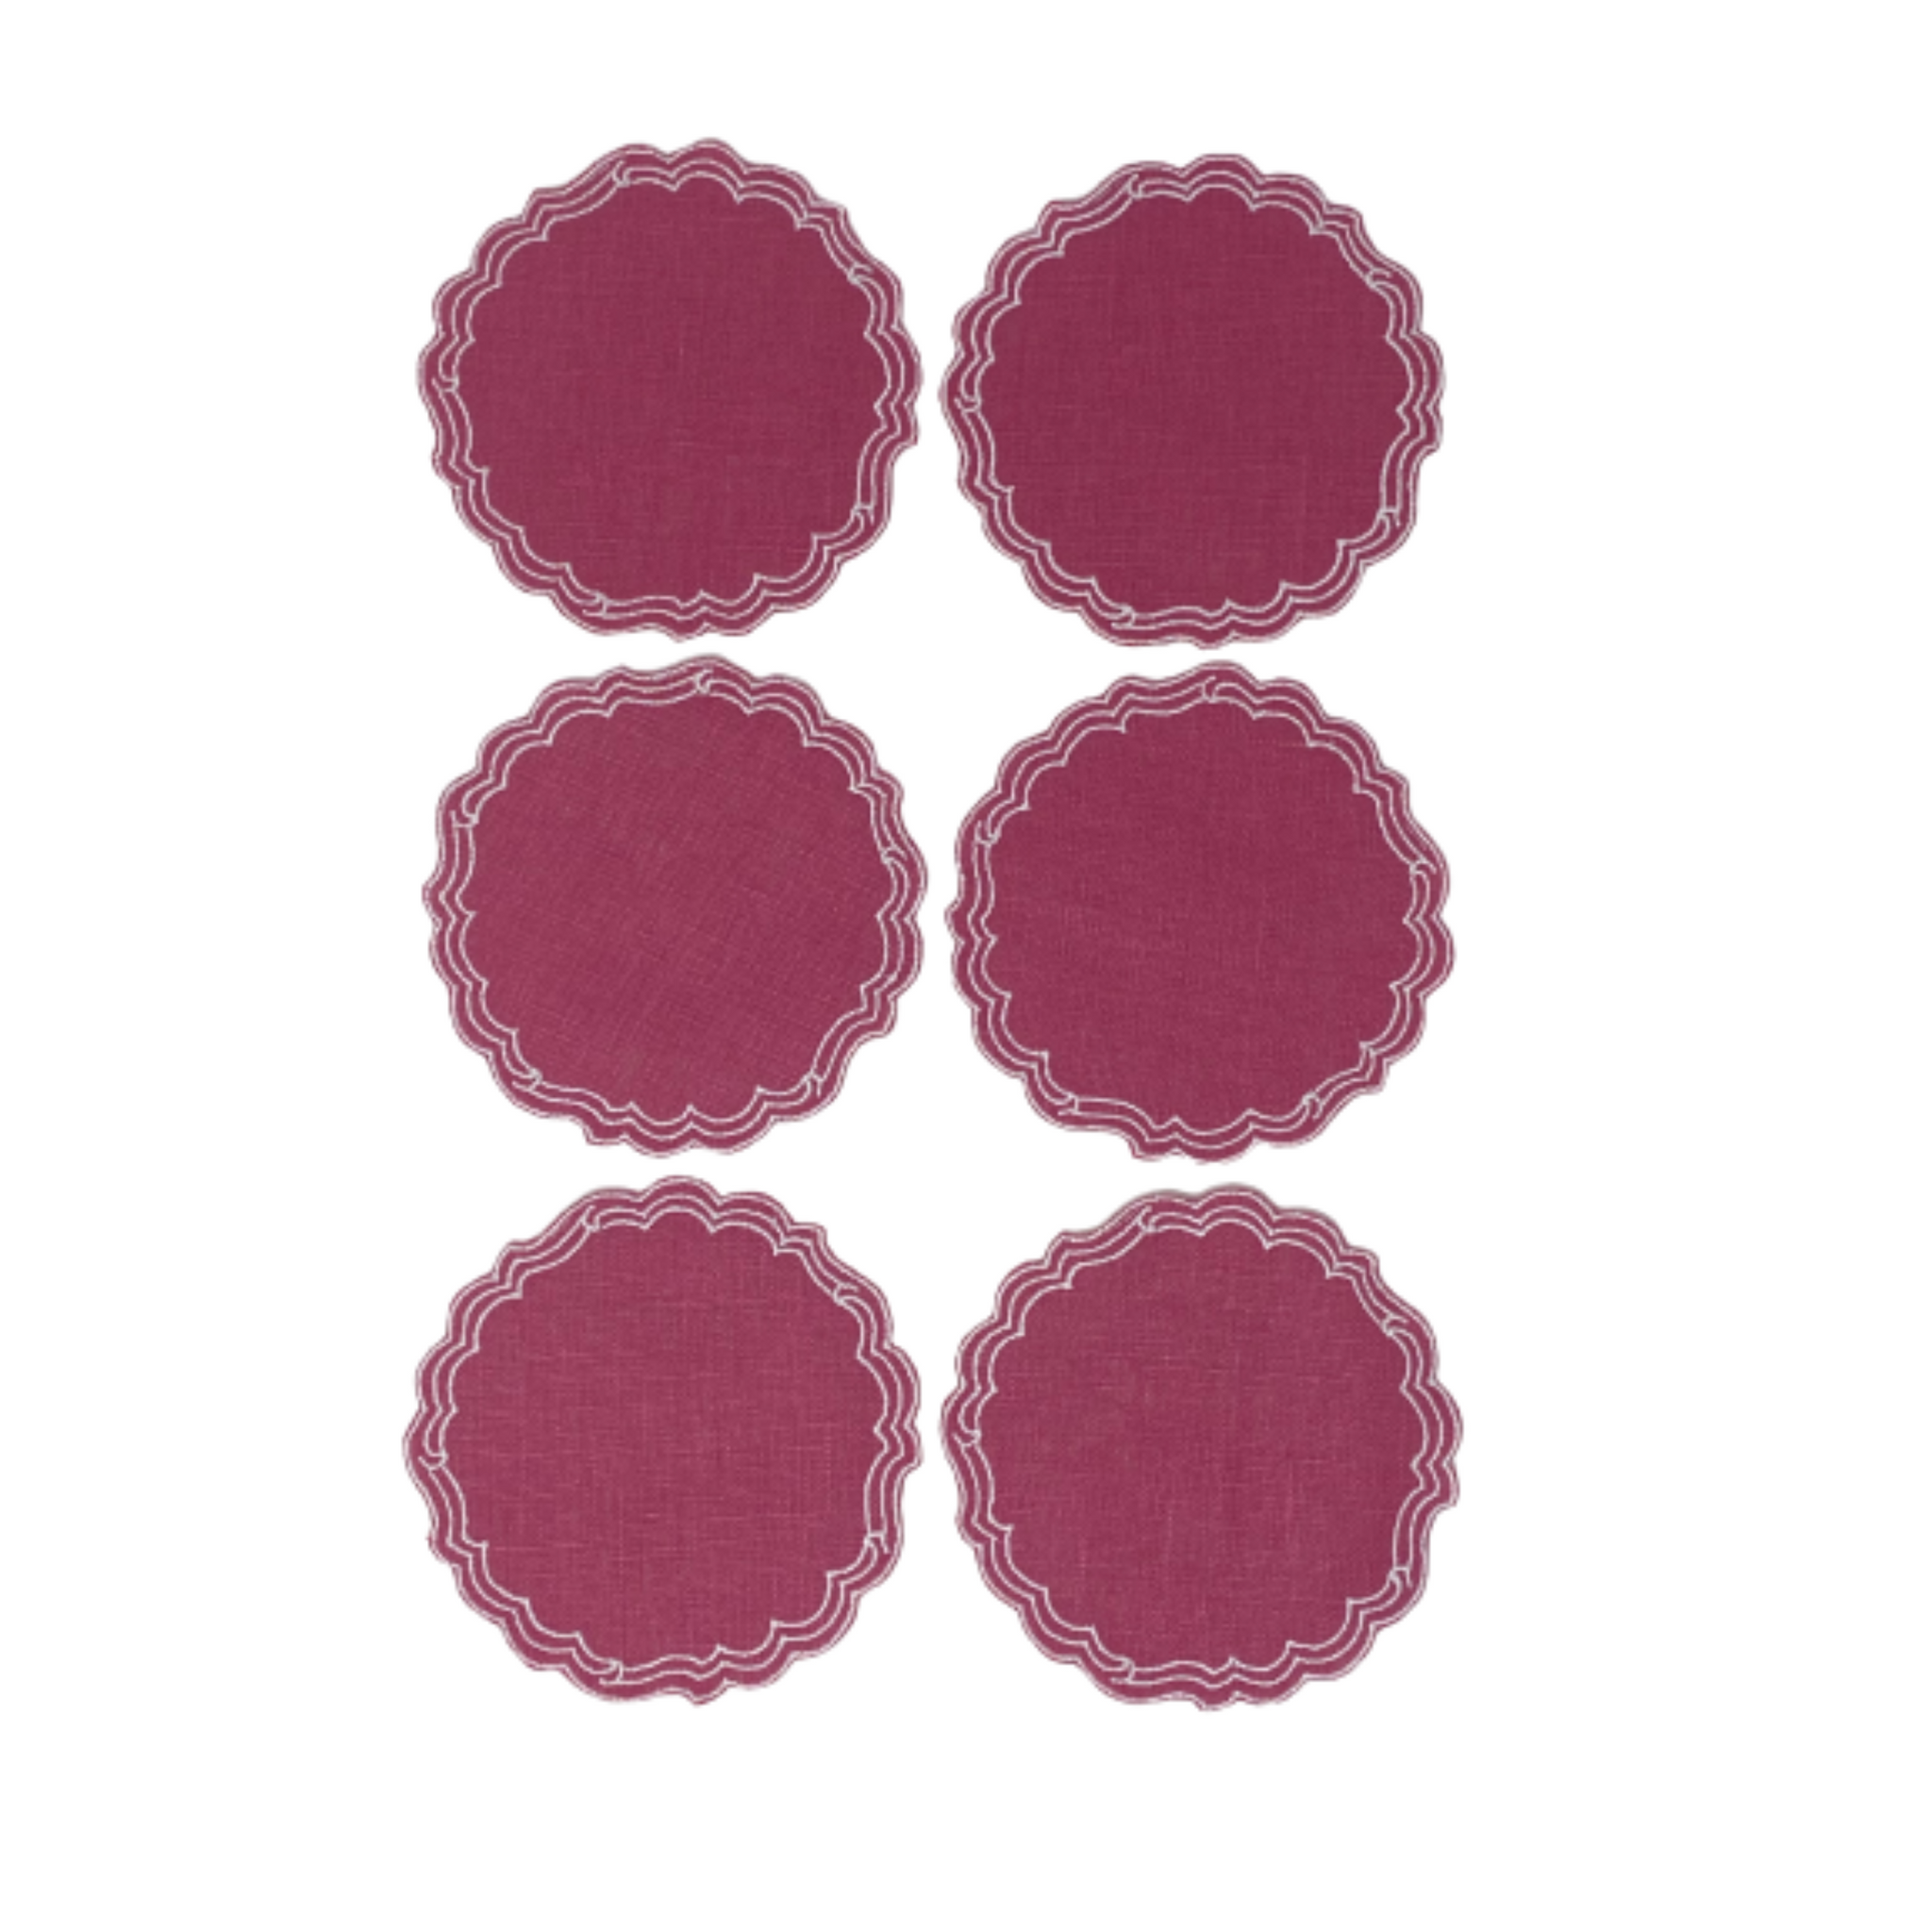 Set of 6 Coaster Victoria Paper Smooth - Cassis/White